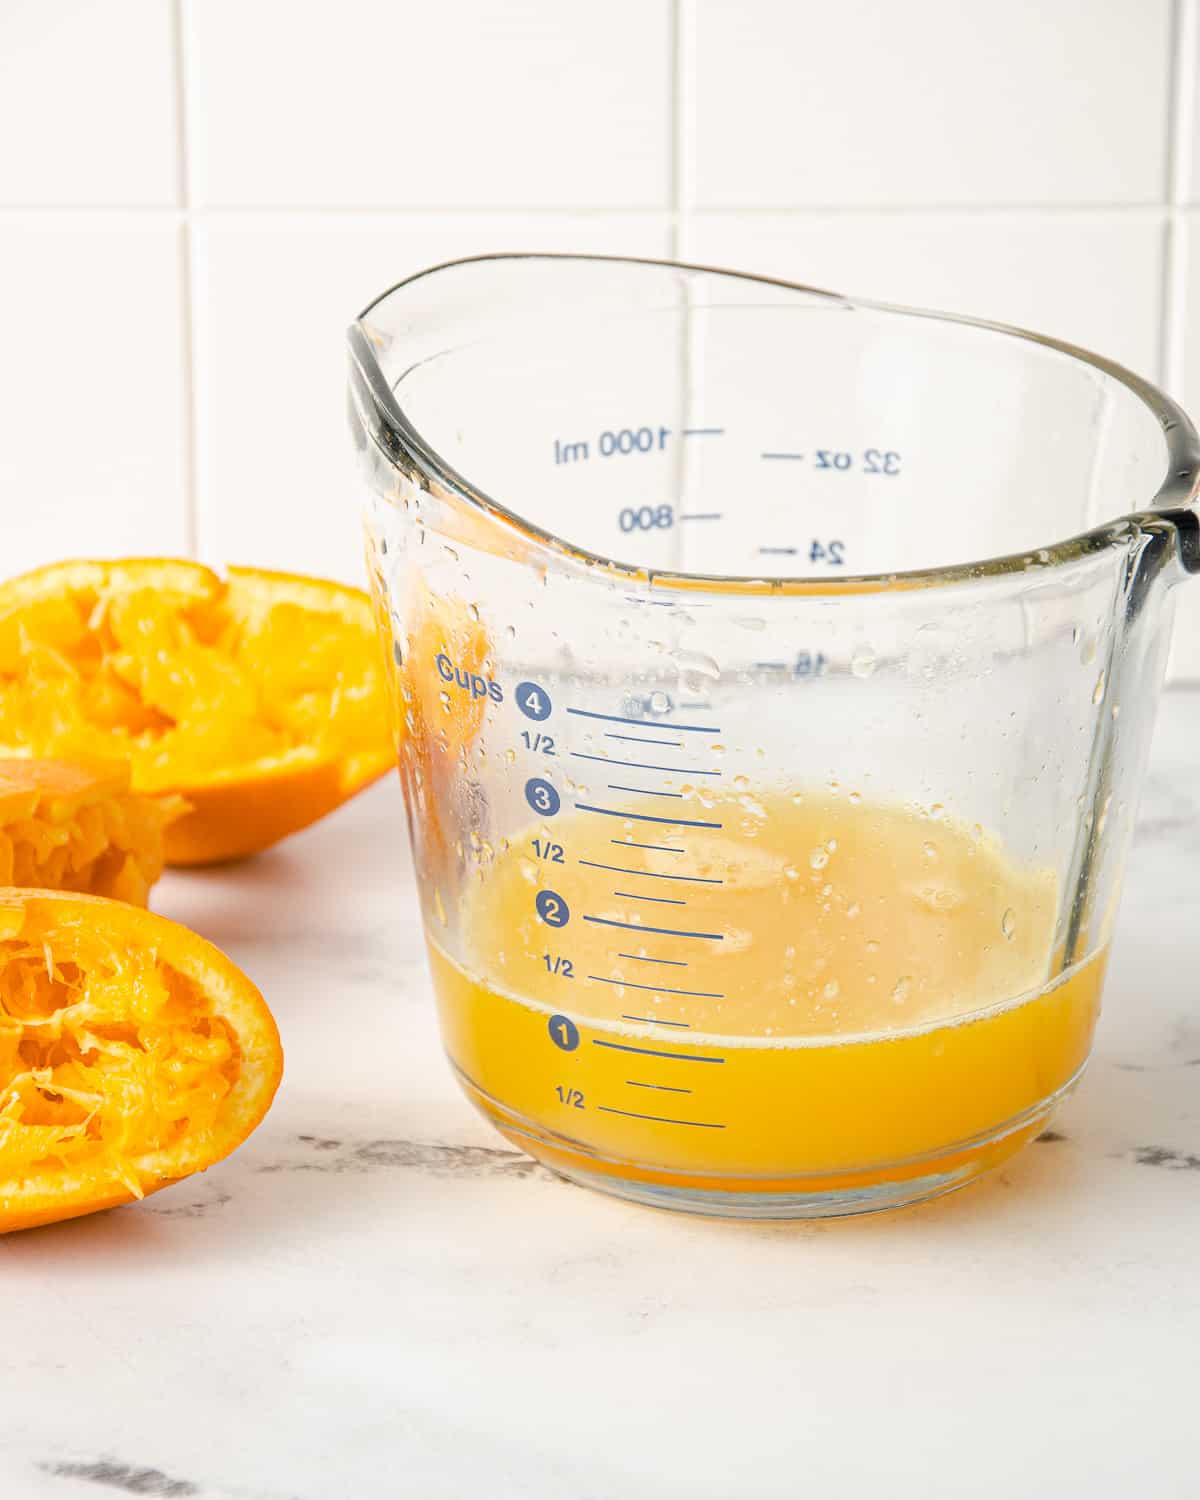 A measuring cup of freshly squeezed orange juice with squeezed orange peels to the side.